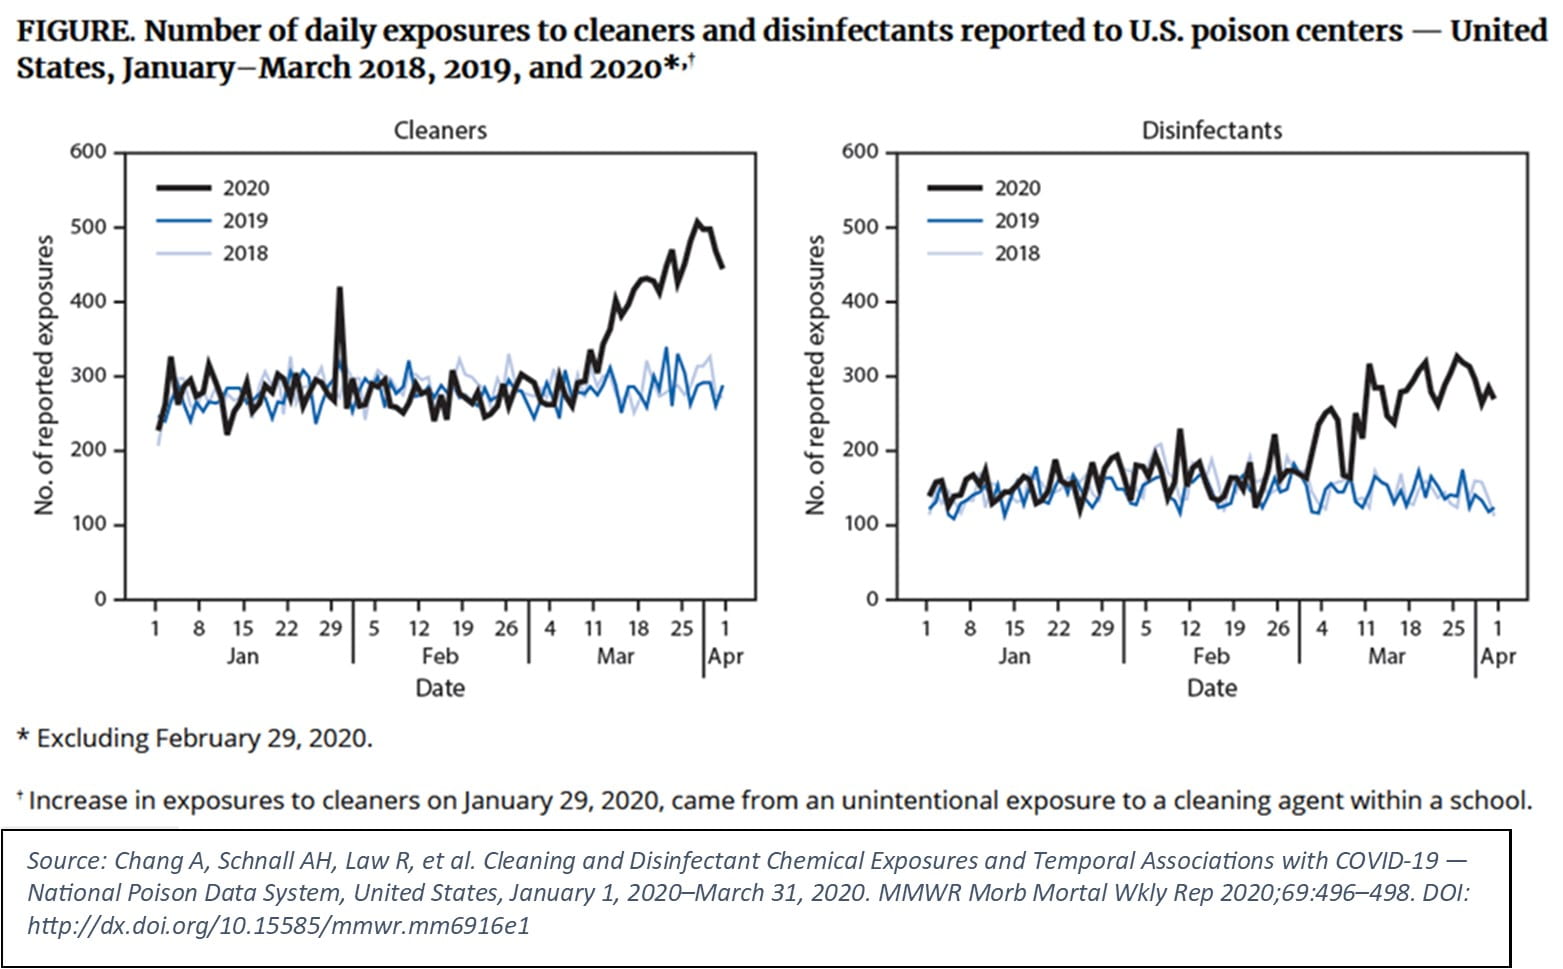 Graphs showing the number of daily exposures to cleaners and disinfectants reported to U.S. poison Centers 2018, 2019, 2020.